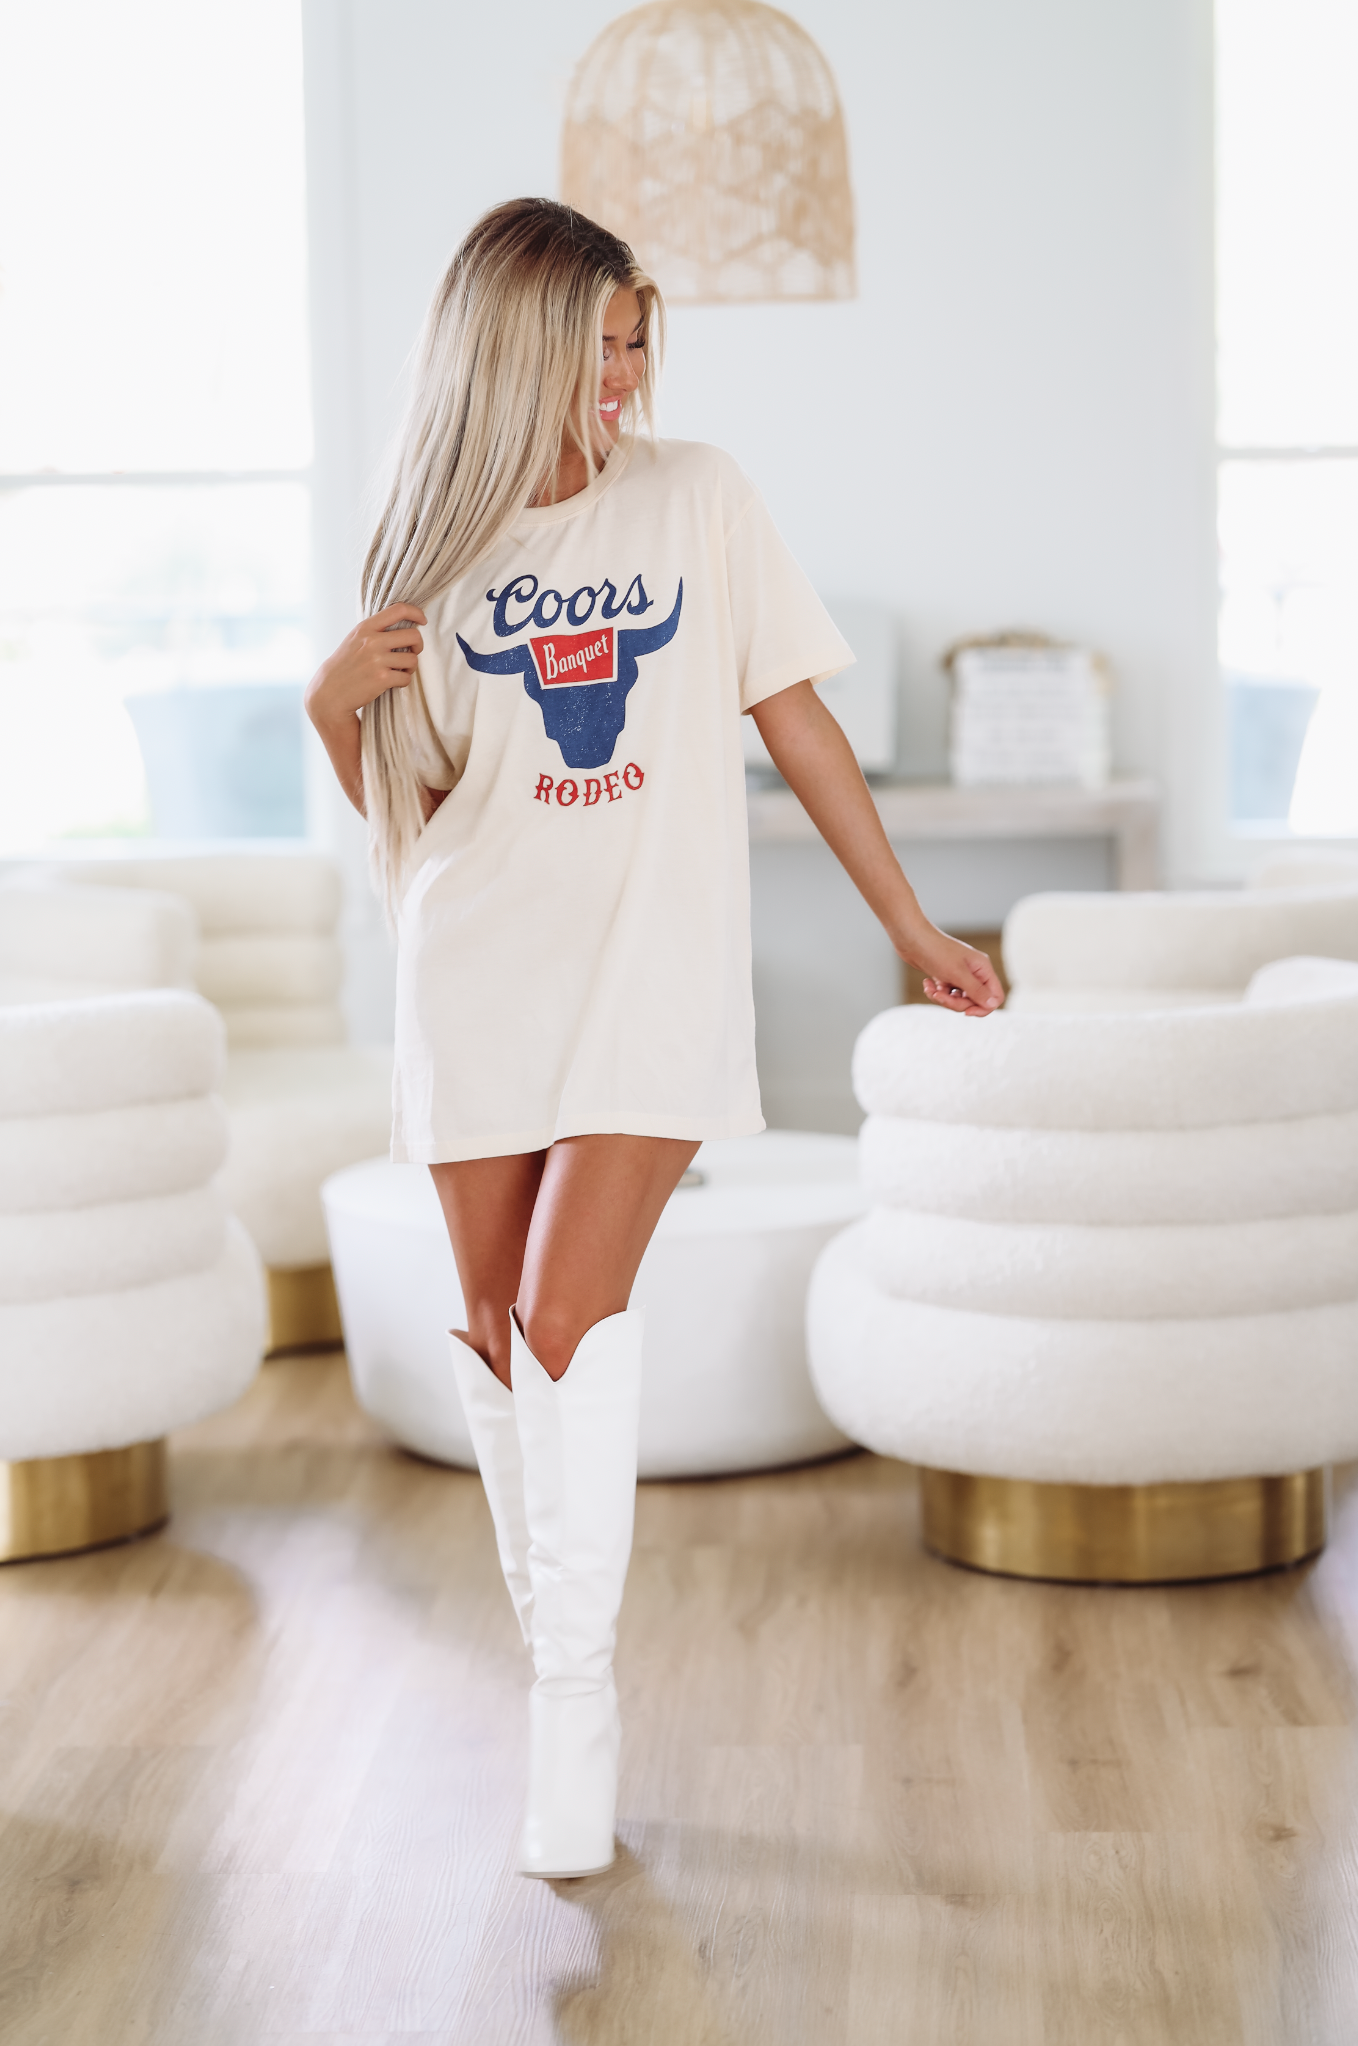 Cowboy Take Me Away Country Graphic Tee - T Shirt Dress - Mineral